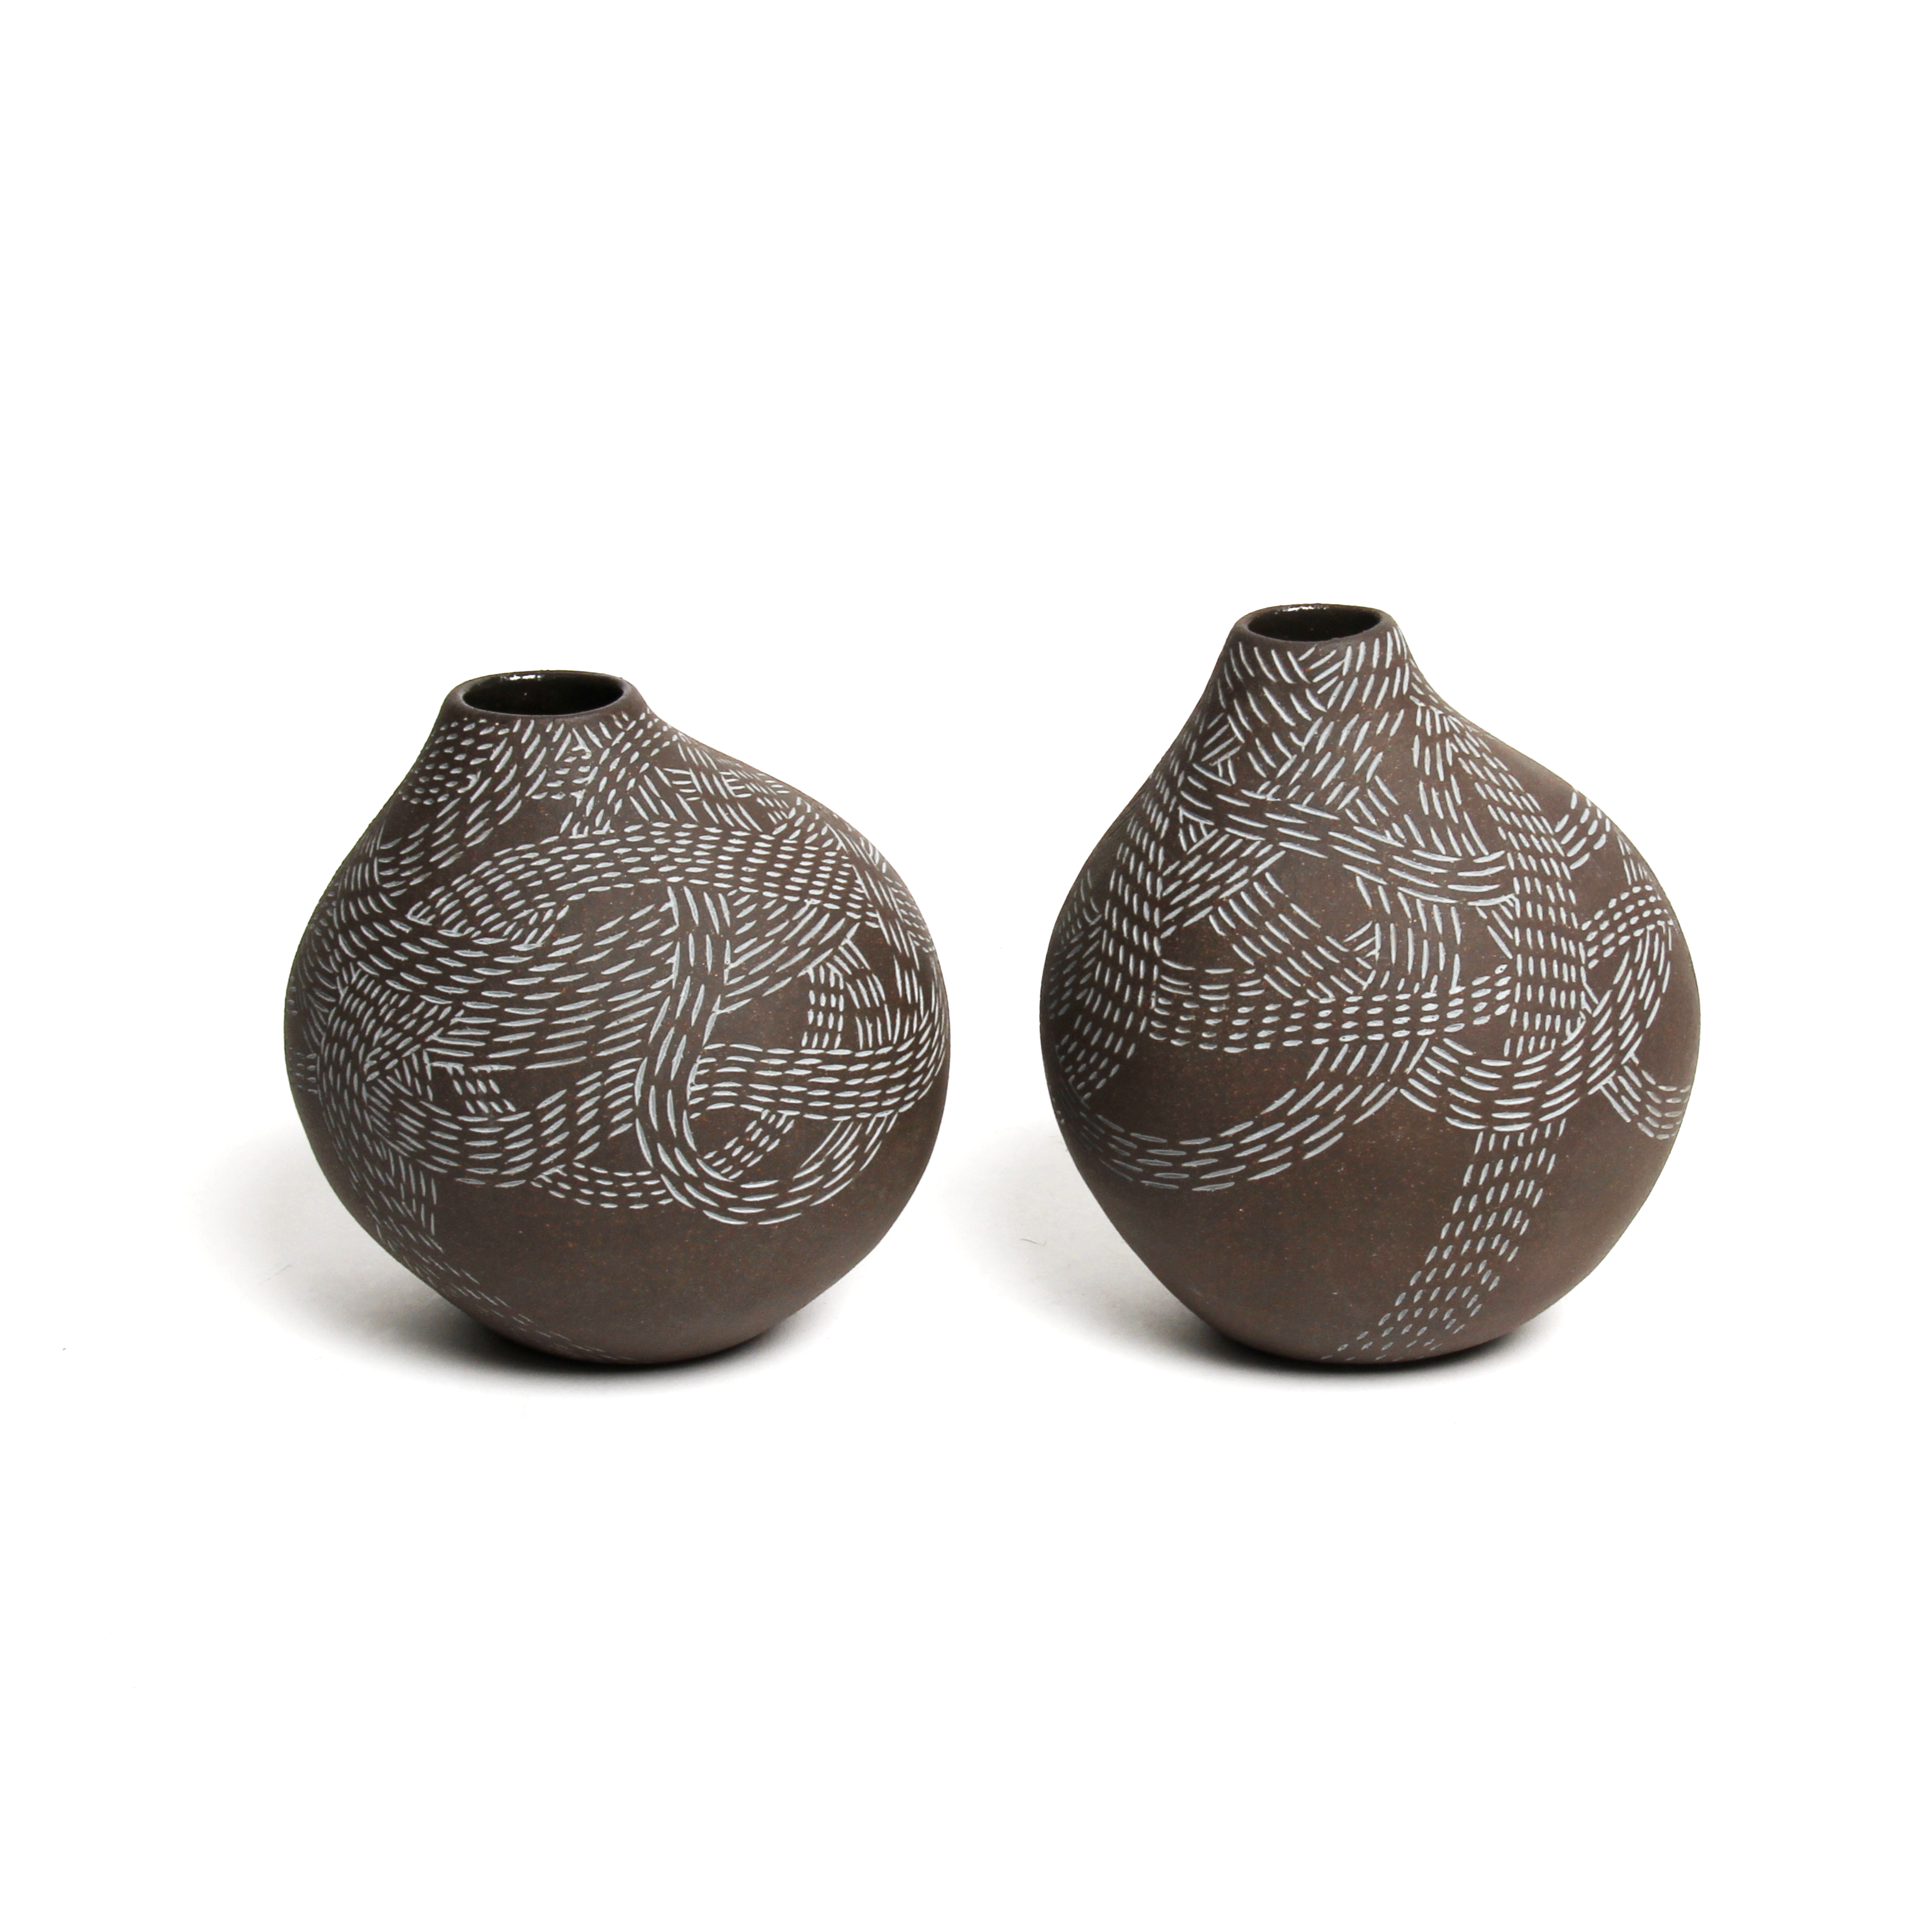 Talia Silva: Small Black and Blue Inlay Vessel (Each sold separately) Product Image 1 of 5